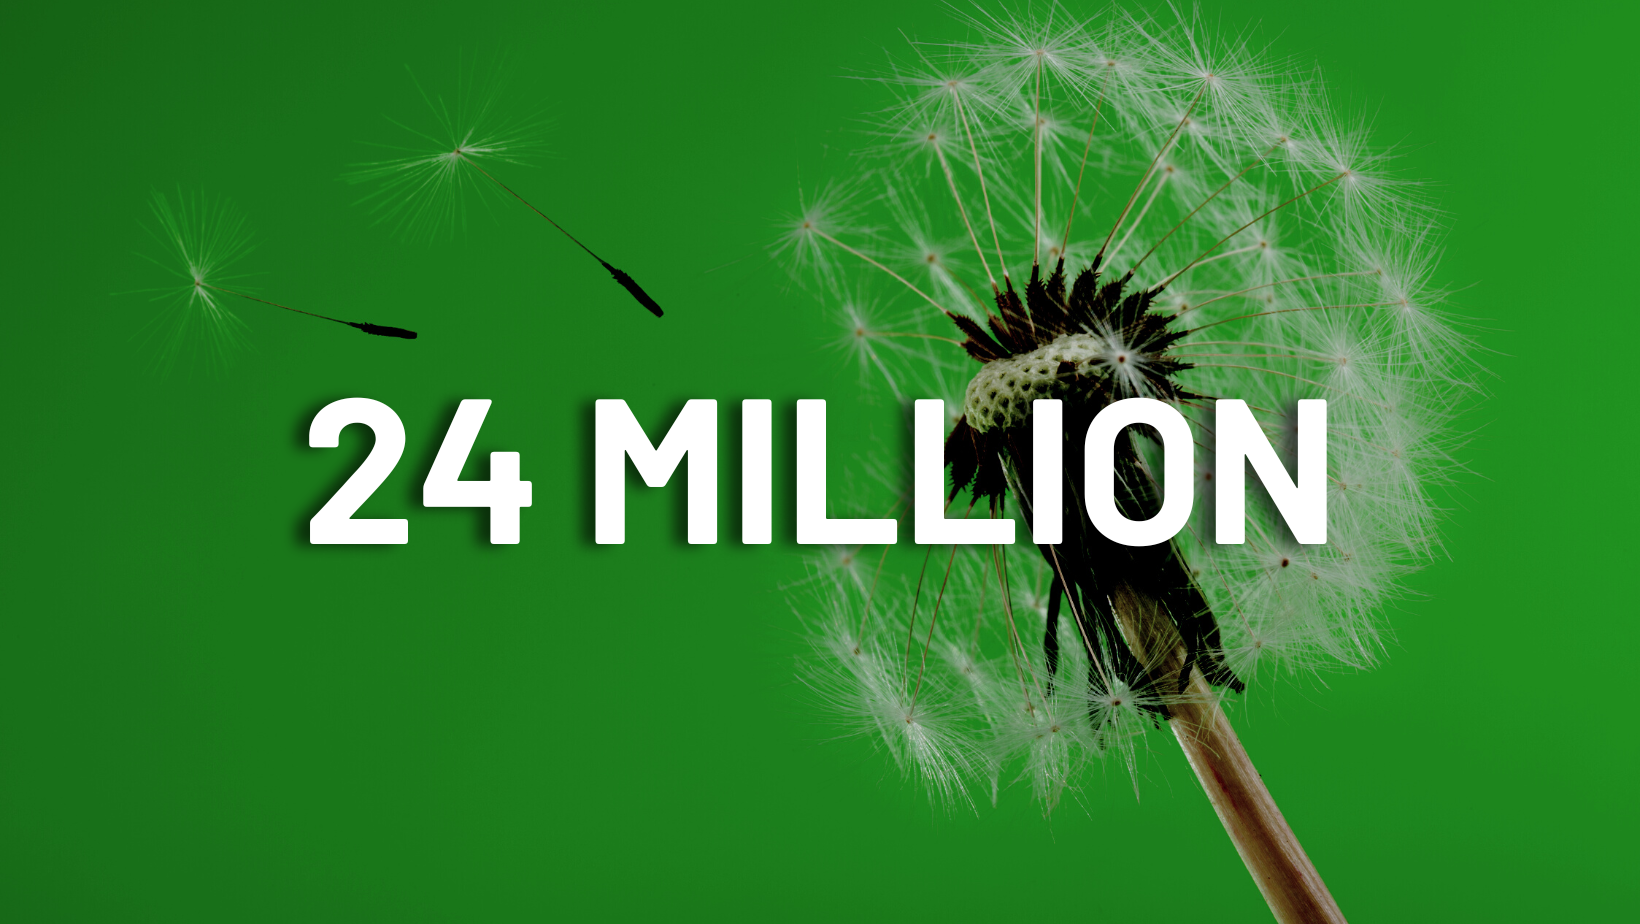 A dandelion is blowing in the wind on a green background.